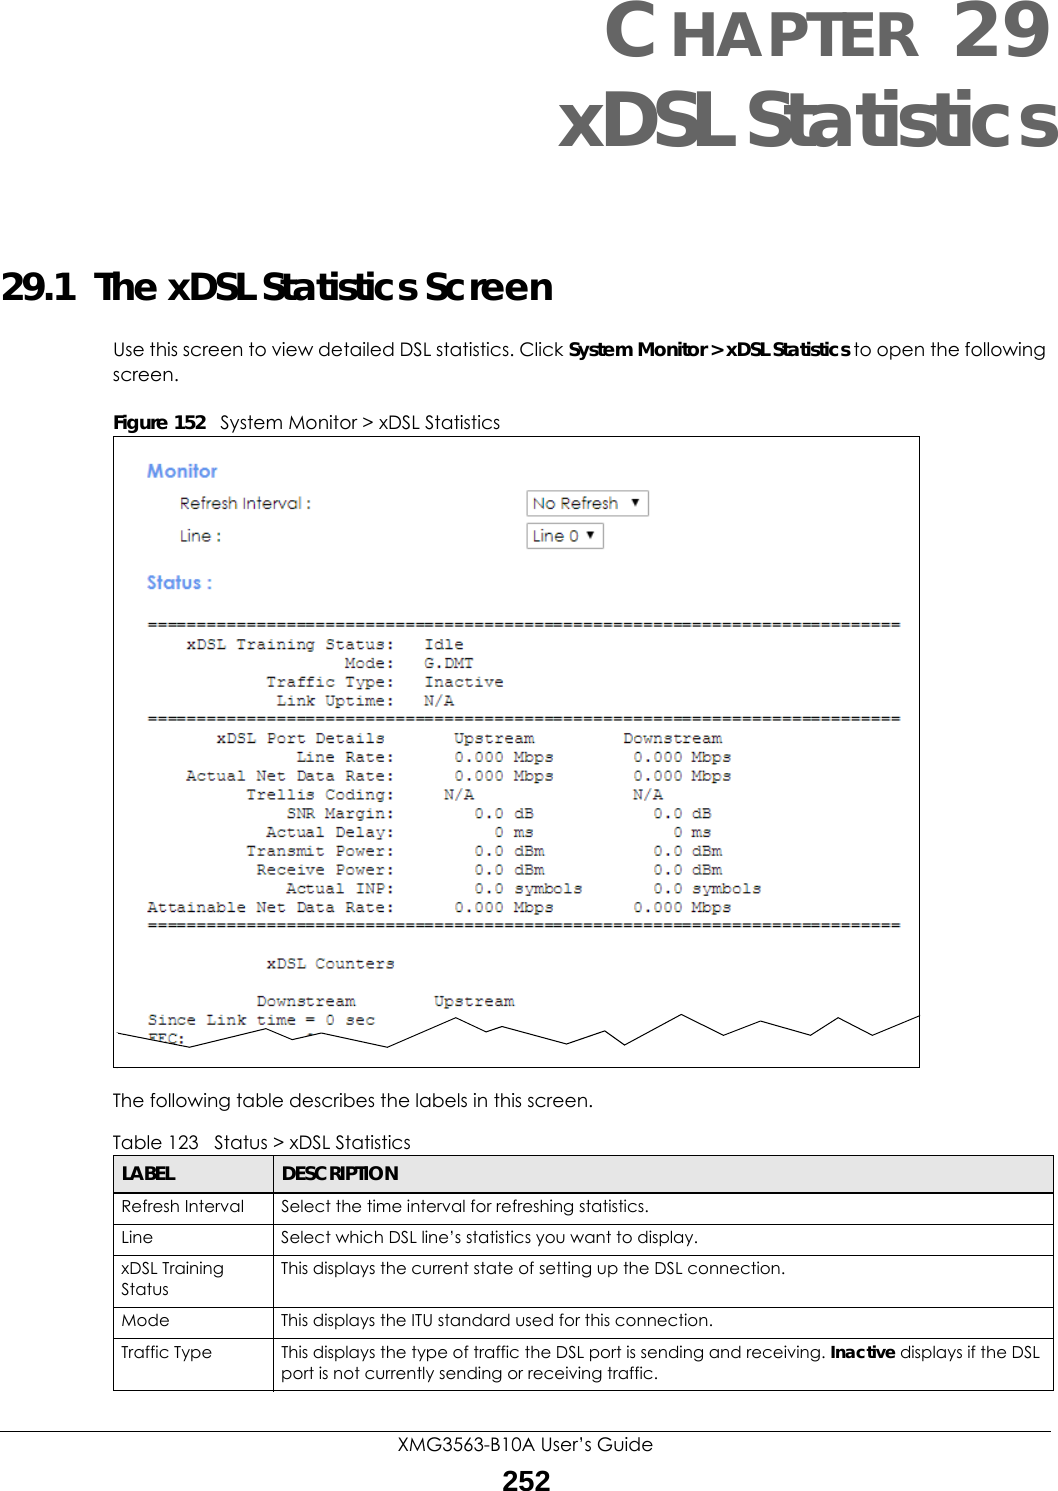 XMG3563-B10A User’s Guide252CHAPTER 29xDSL Statistics29.1  The xDSL Statistics ScreenUse this screen to view detailed DSL statistics. Click System Monitor &gt; xDSL Statistics to open the following screen.Figure 152   System Monitor &gt; xDSL StatisticsThe following table describes the labels in this screen.  Table 123   Status &gt; xDSL StatisticsLABEL DESCRIPTIONRefresh Interval Select the time interval for refreshing statistics.Line  Select which DSL line’s statistics you want to display.xDSL Training StatusThis displays the current state of setting up the DSL connection.Mode This displays the ITU standard used for this connection.Traffic Type This displays the type of traffic the DSL port is sending and receiving. Inactive displays if the DSL port is not currently sending or receiving traffic.